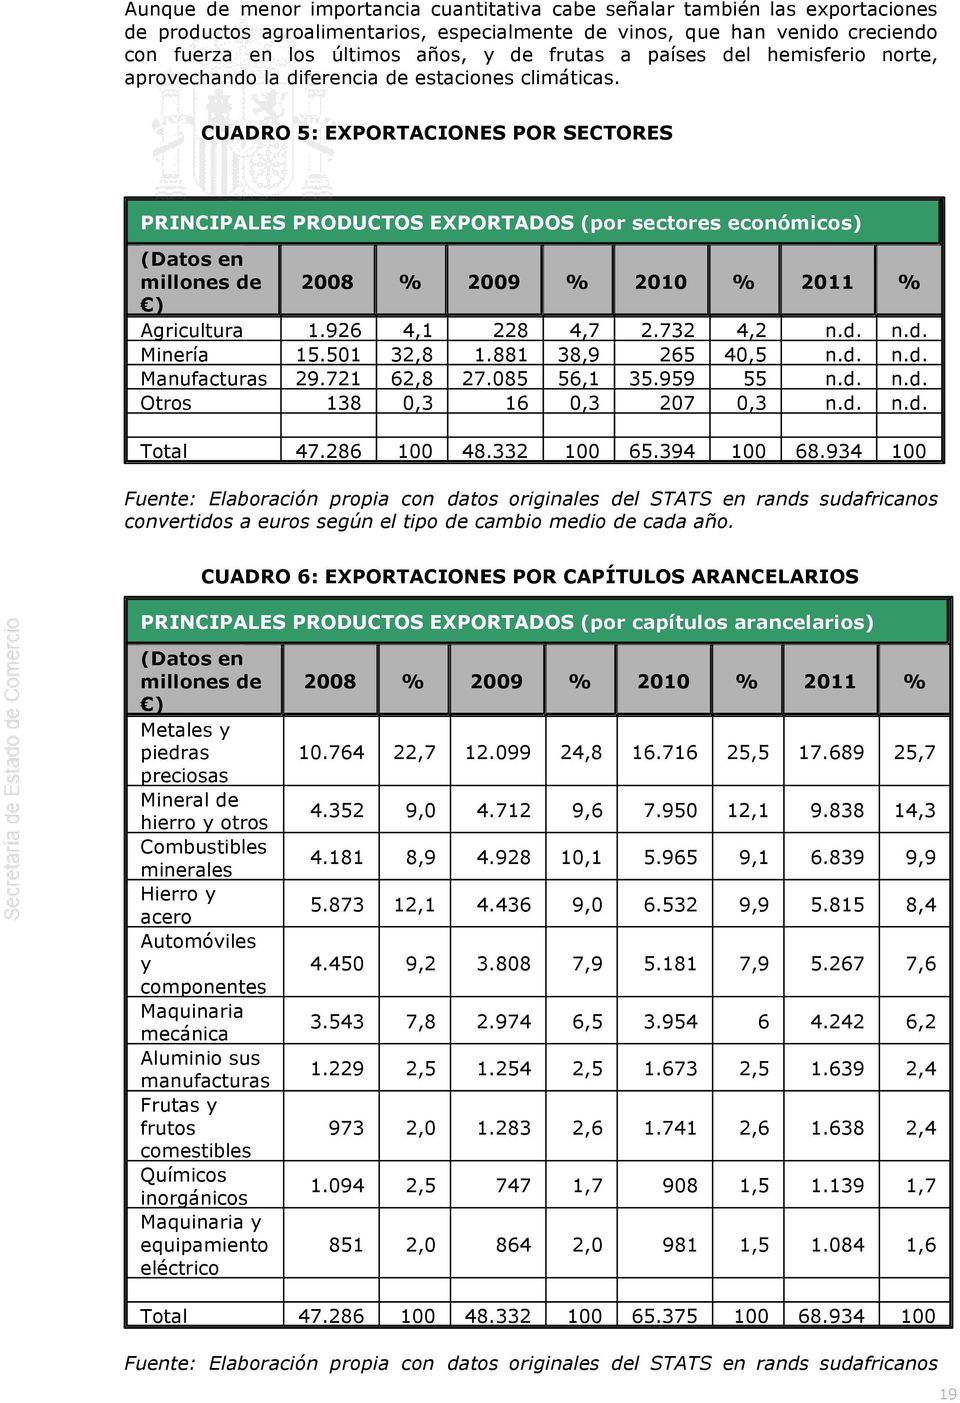 millones de 2008 % 2009 % 2010 % 2011 % ) Agricultura 1926 4,1 228 4,7 2732 4,2 nd nd Minería 15501 32,8 1881 38,9 265 40,5 nd nd Manufacturas 29721 62,8 27085 56,1 35959 55 nd nd Otros 138 0,3 16